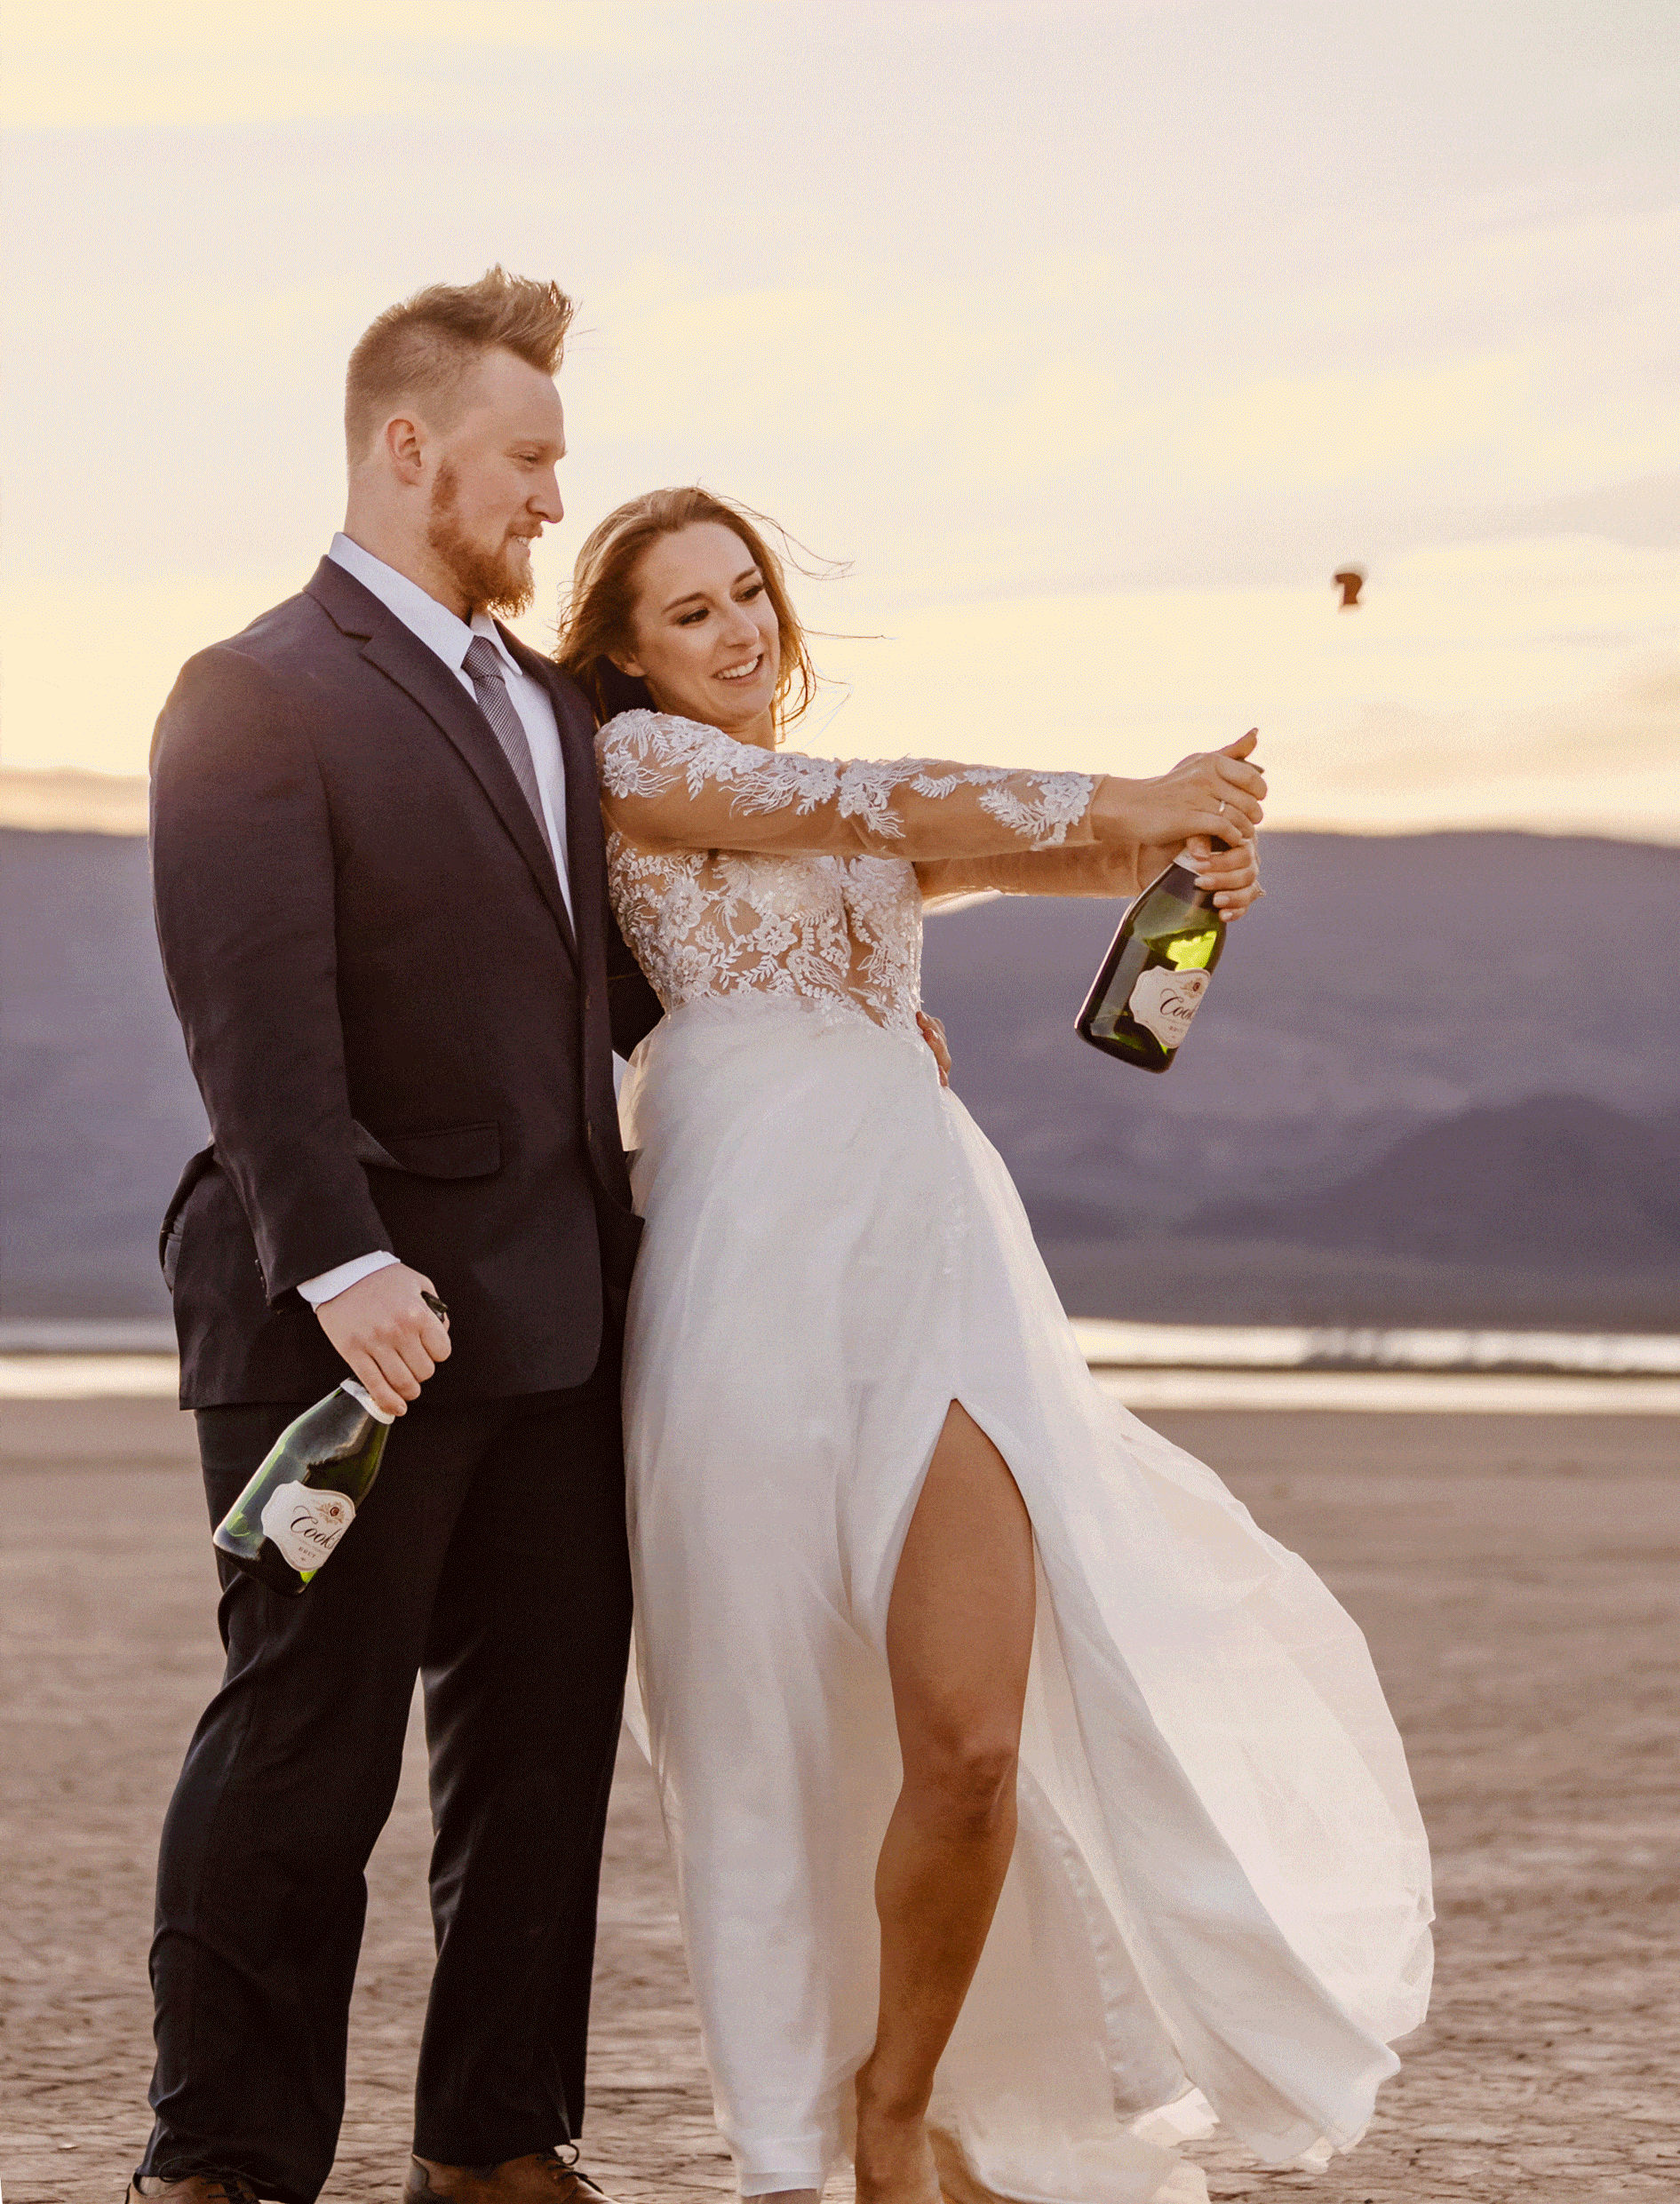 Gif of bride popping and spraying champagne while the groom stands next to her holding her hip during their elopement at a dry lake bed in Las Vegas.